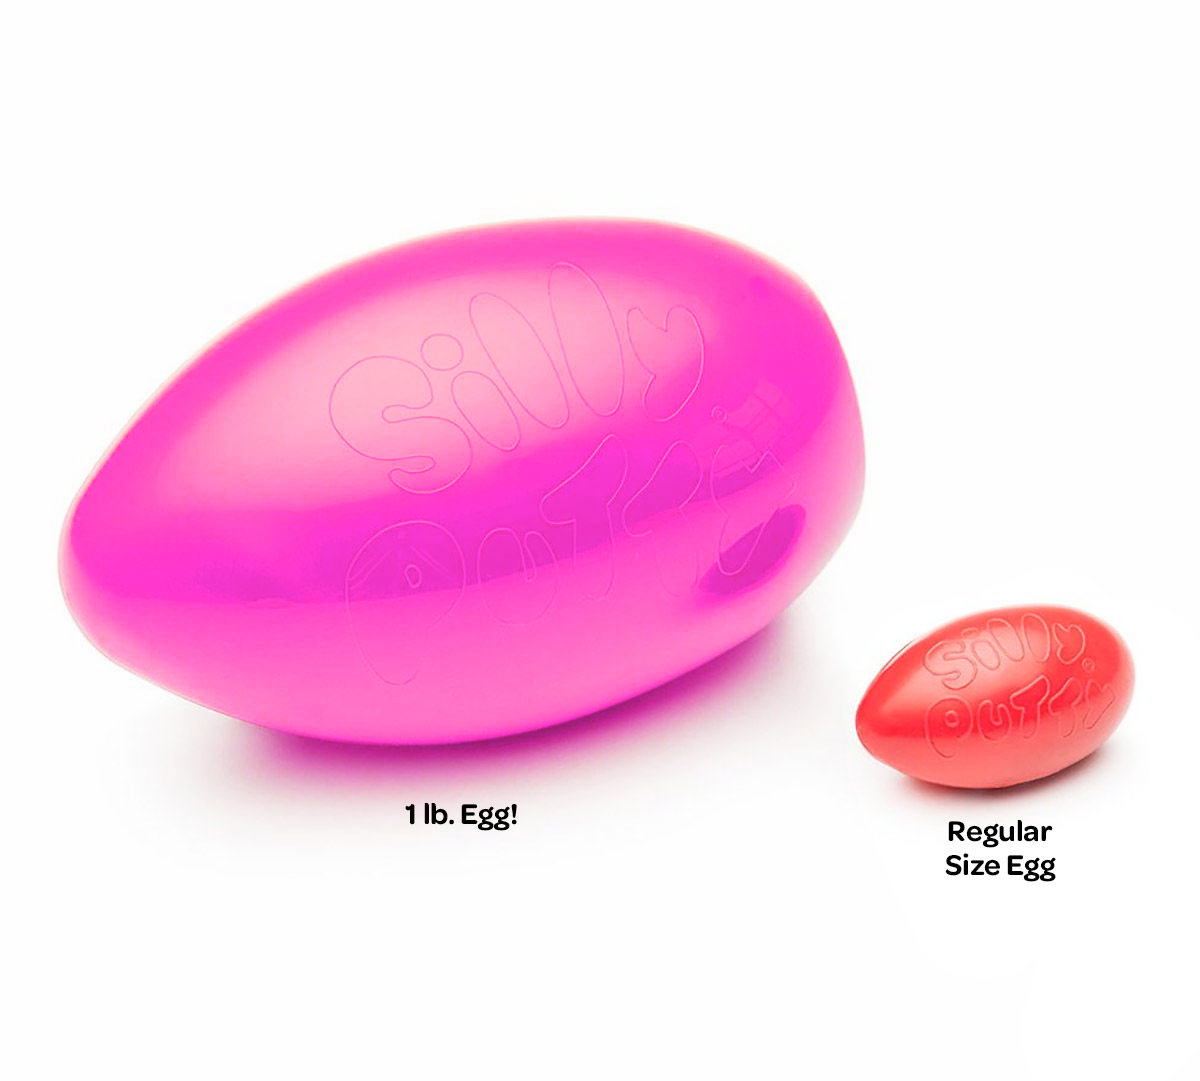 FACTORY NEW! FREE SHIPPING!! THE ORIGINAL SILLY PUTTY 2 FOR $8.88 RED EGGS! 